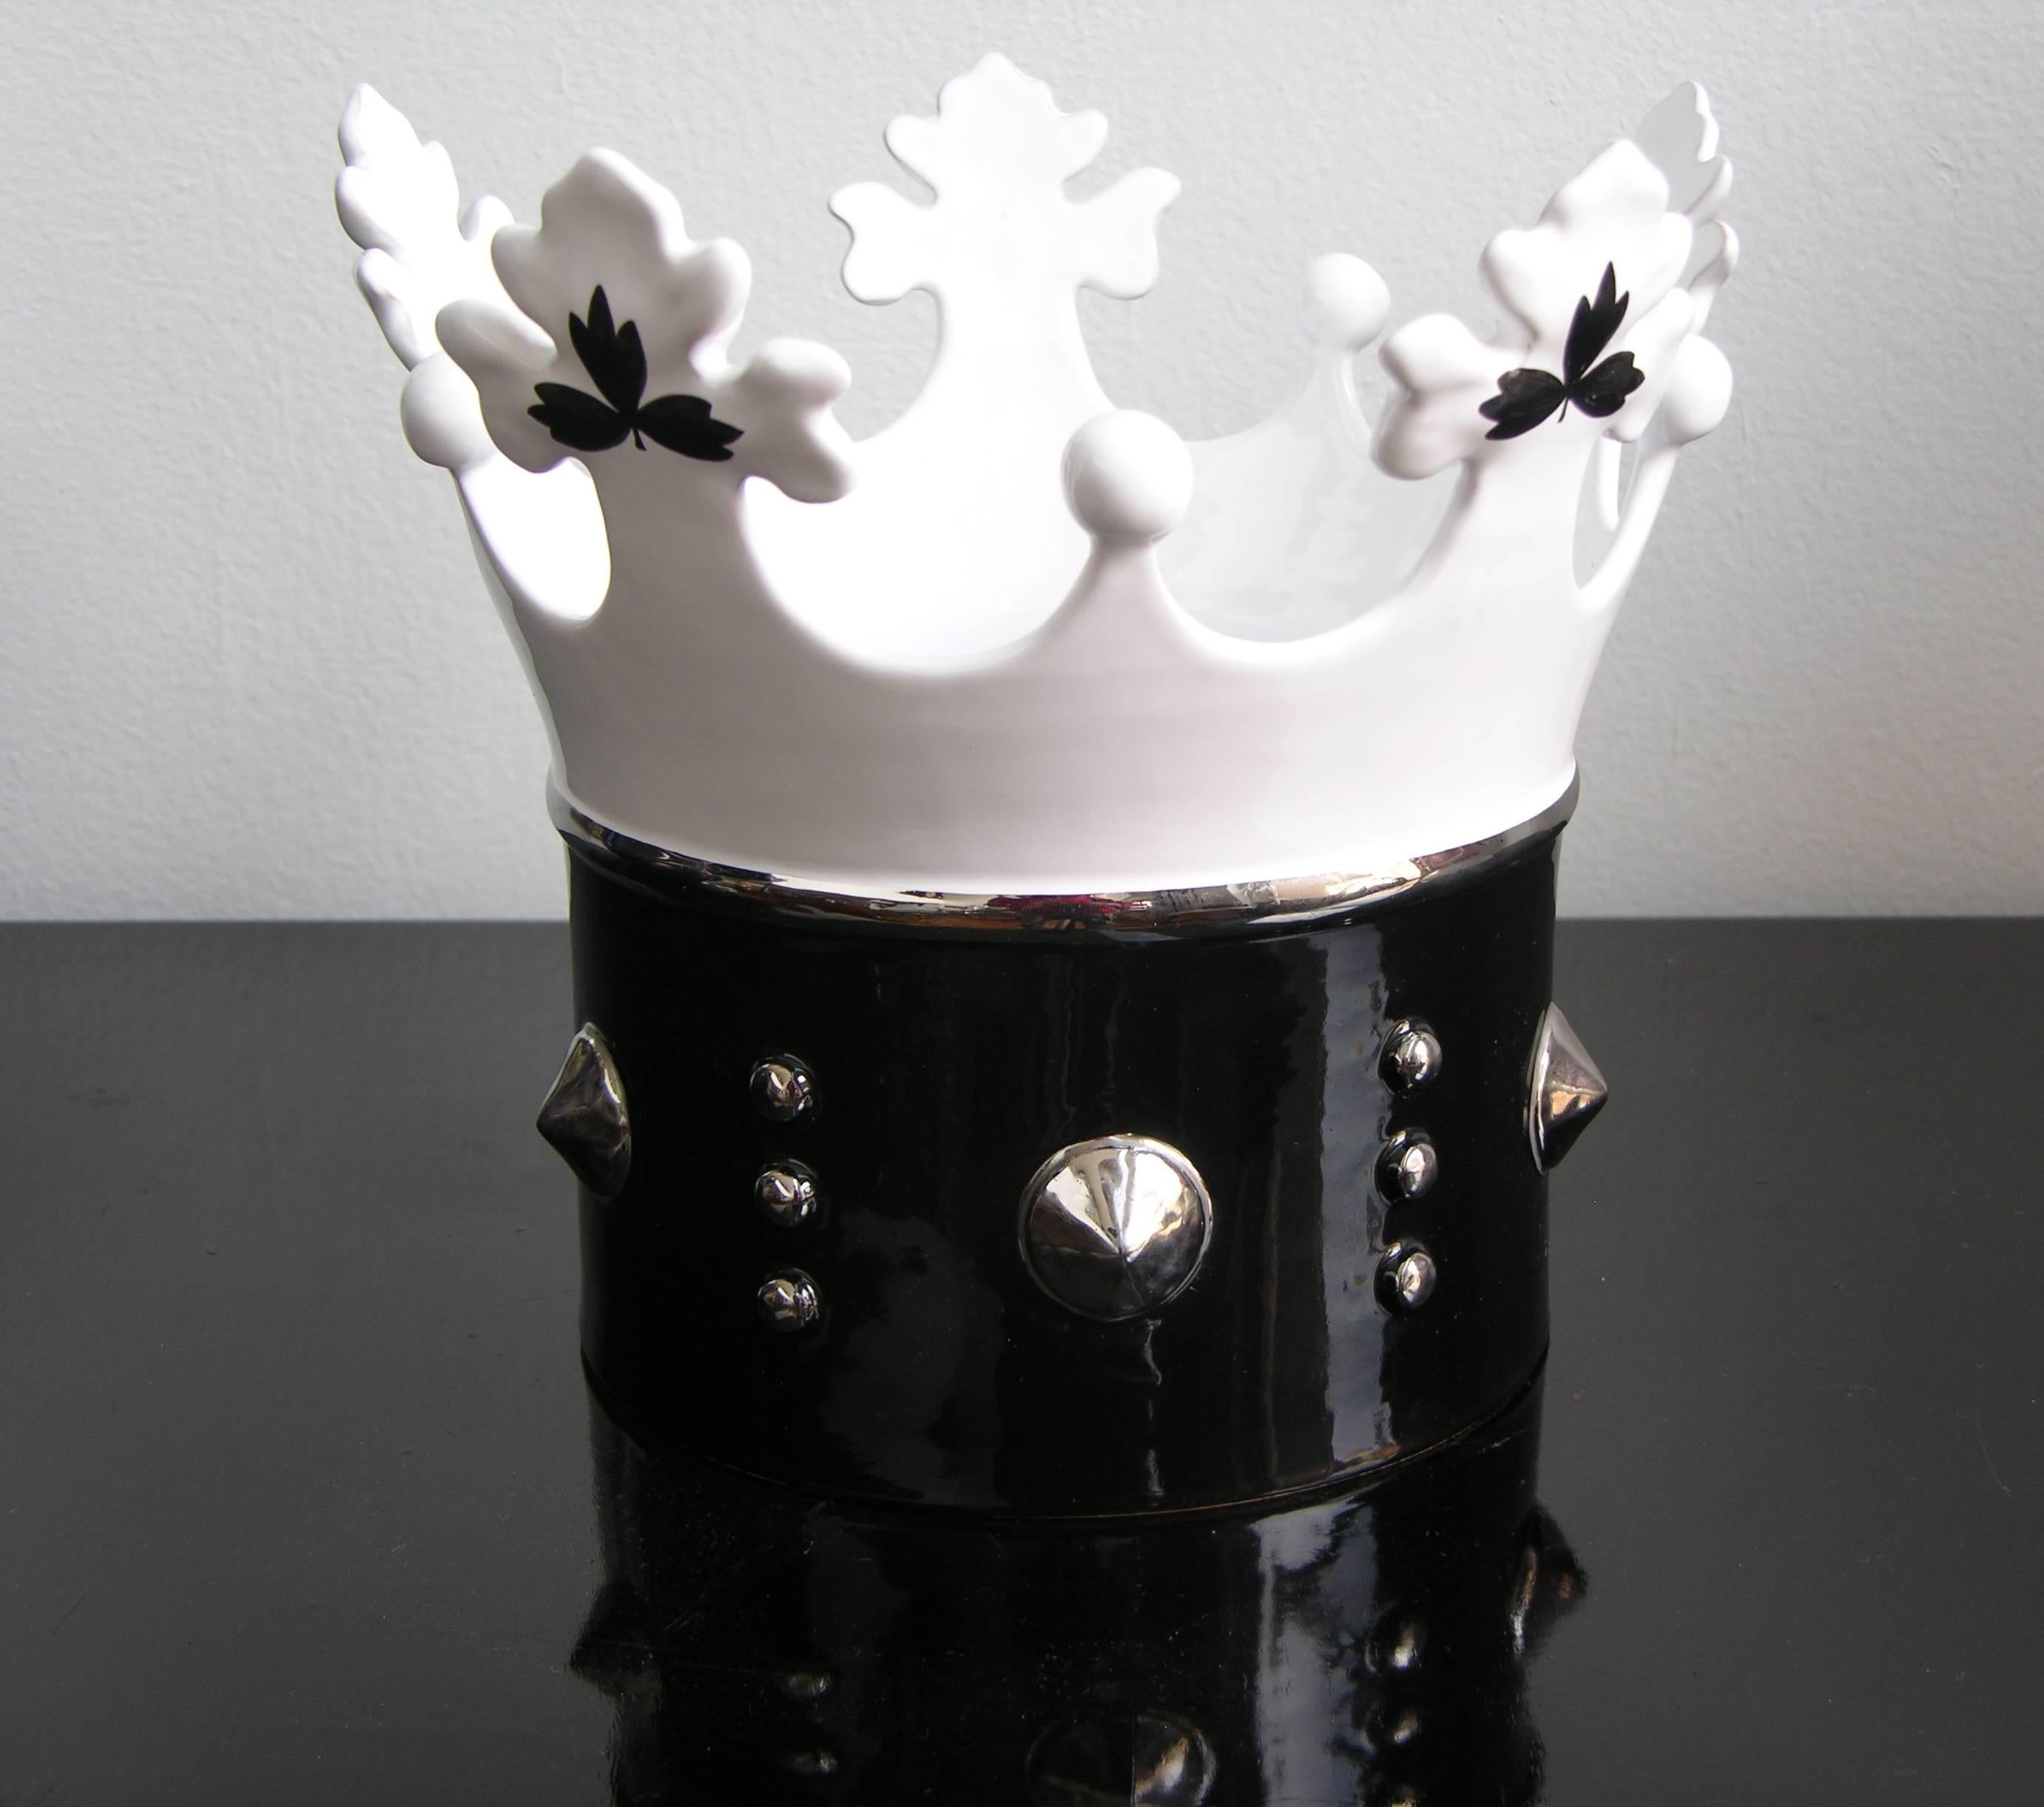 Hand-Crafted Contemporary Italian Black & White Majolica Crown Bowl with Platinum Accents